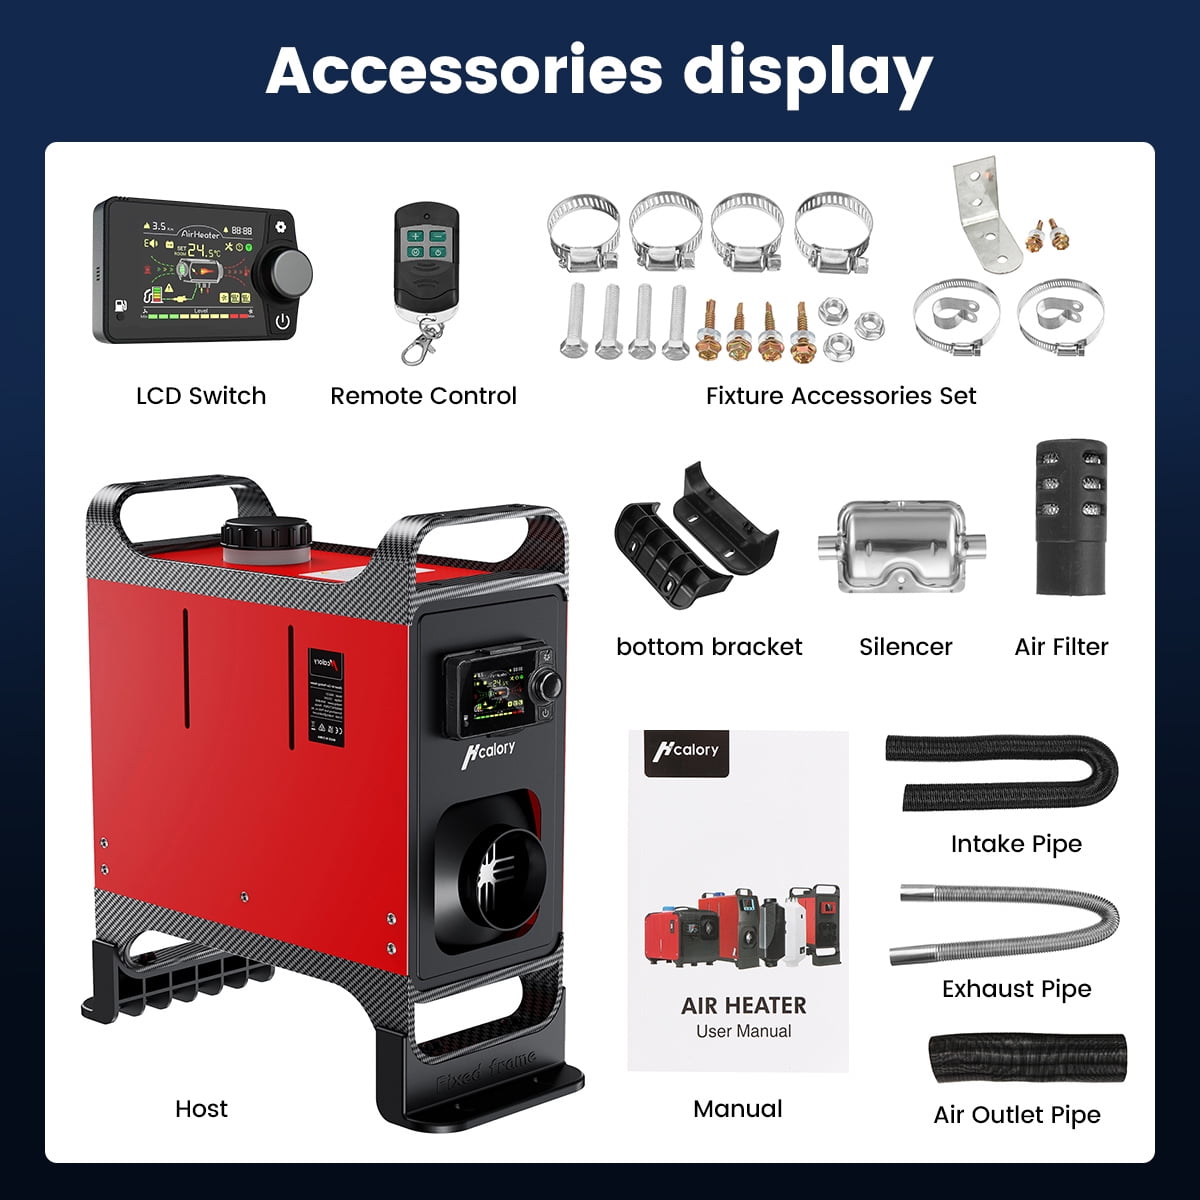 HCalory 24V 8KW Car Heater Air Diesel Heater New LCD Monitor + Tank Remote  Control For RV Boats Trailer Truck Motorhome From Tonethiny, $302.26